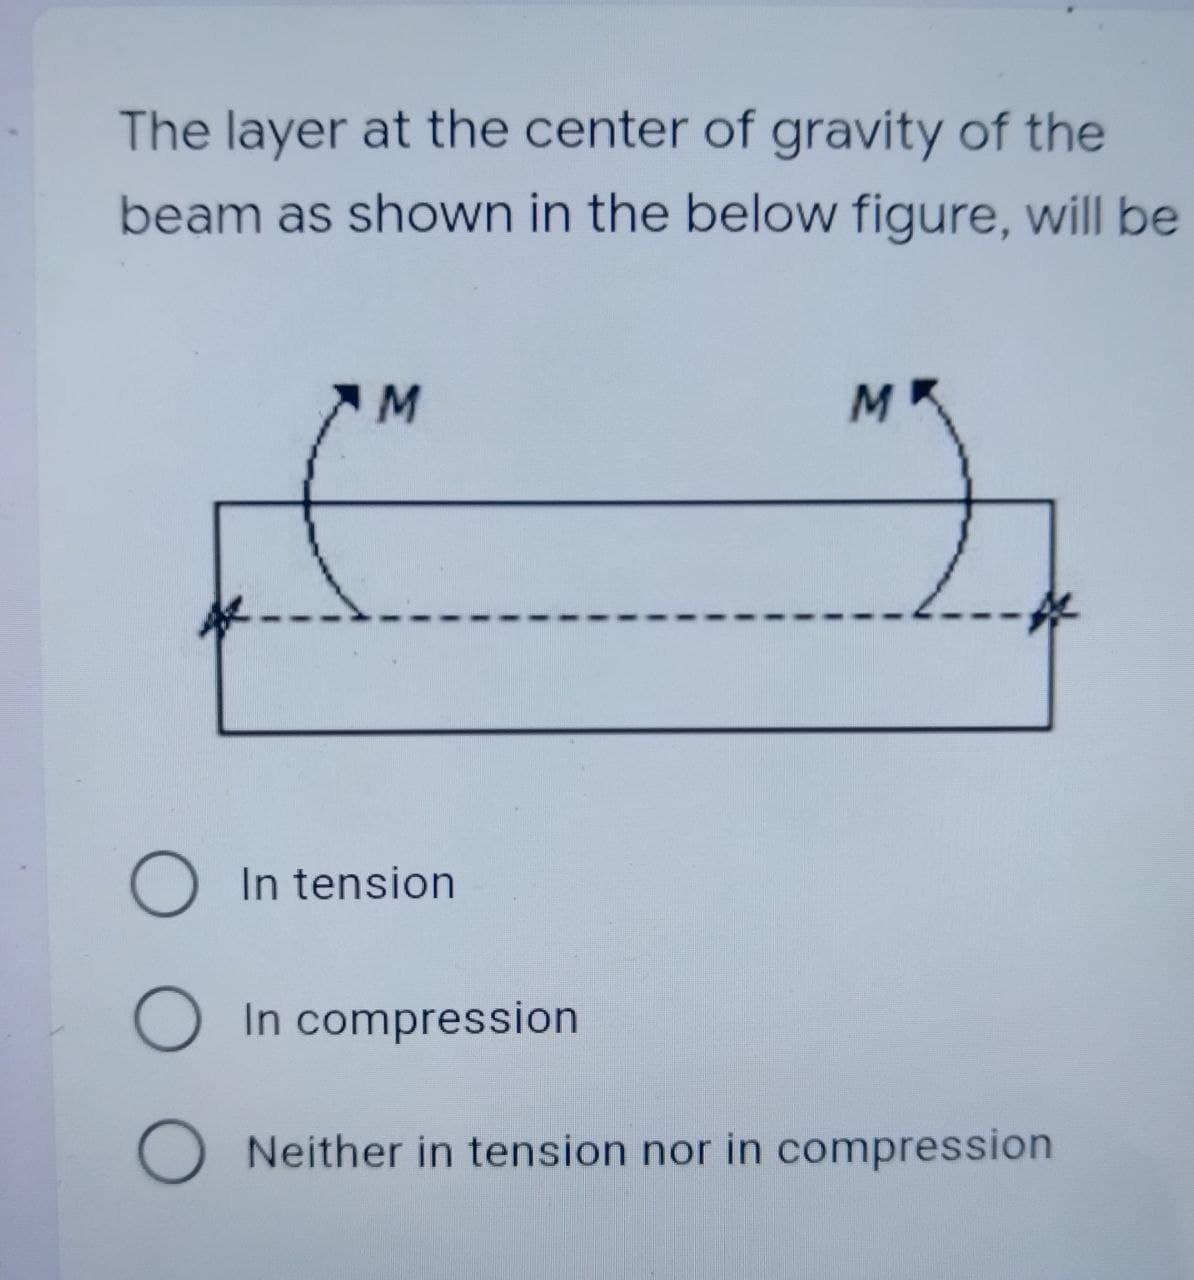 The layer at the center of gravity of the
beam as shown in the below figure, will be
M
M
MJ
O In tension
O In compression
ONeither in tension nor in compression